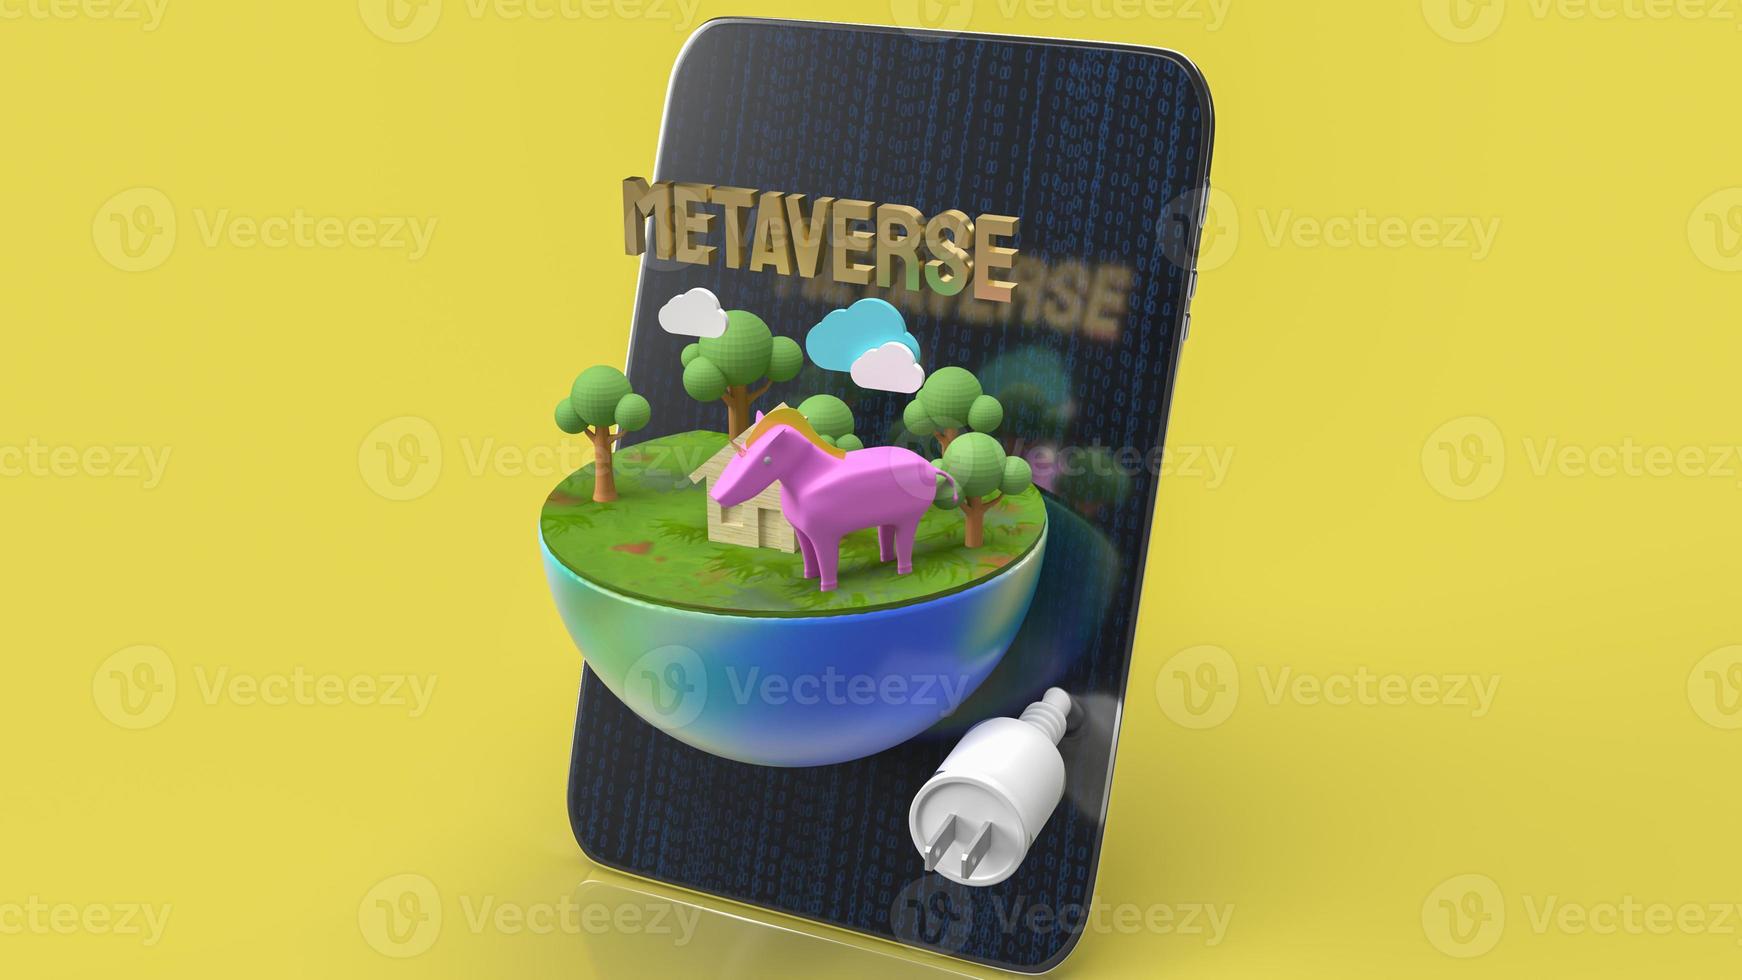 The table and earth for metaverse for technology or vr concept 3d rendering photo